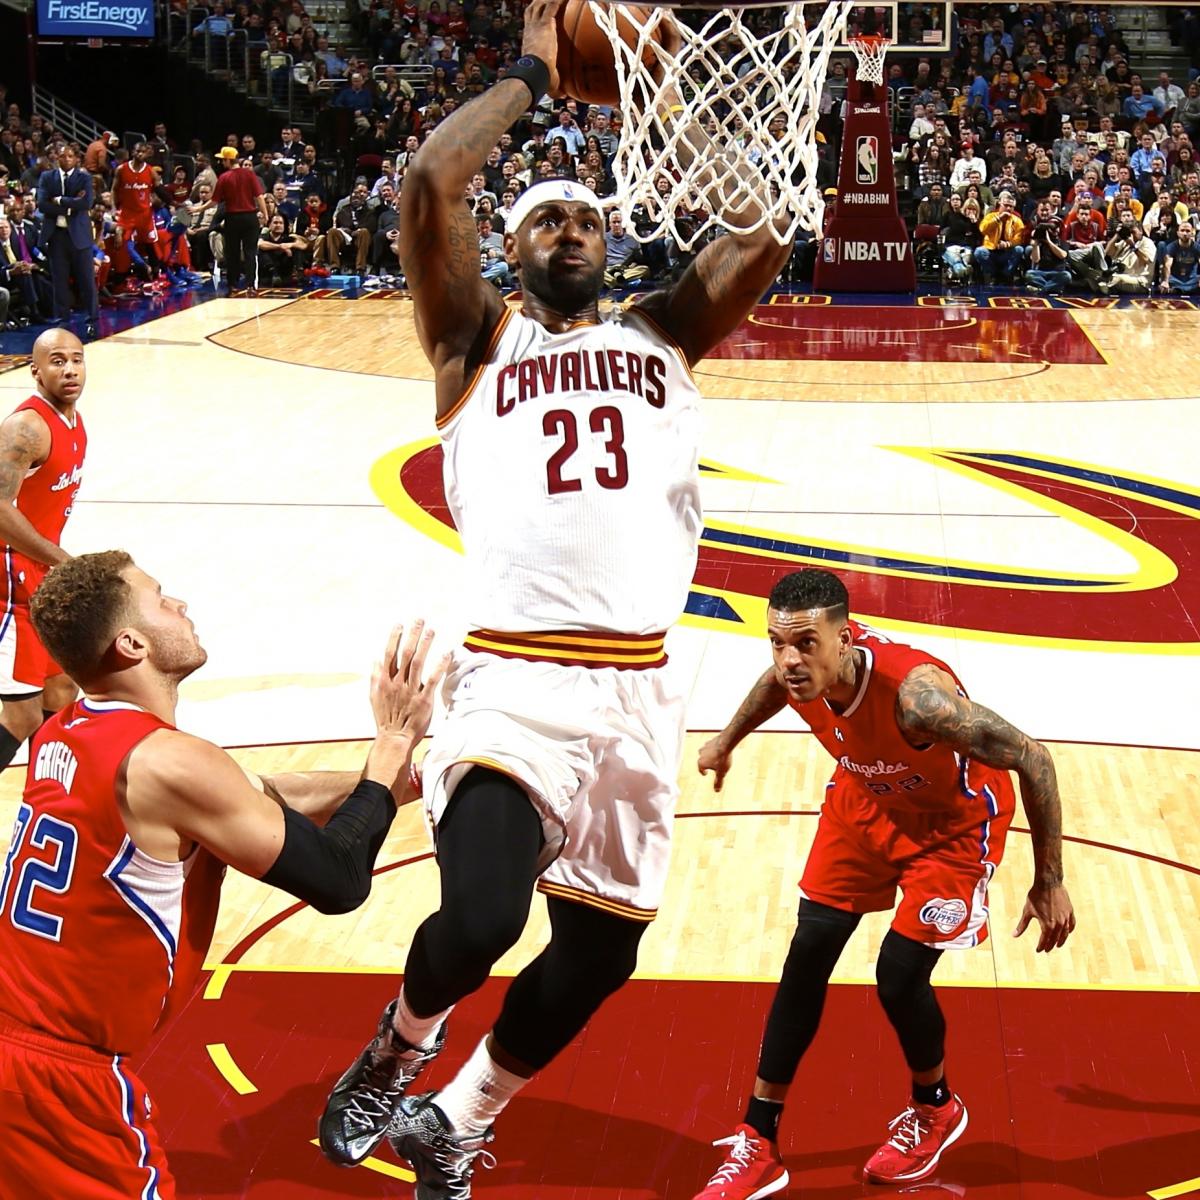 LA Clippers vs. Cleveland Cavaliers: Live Score, Highlights and Analysis | Bleacher ...